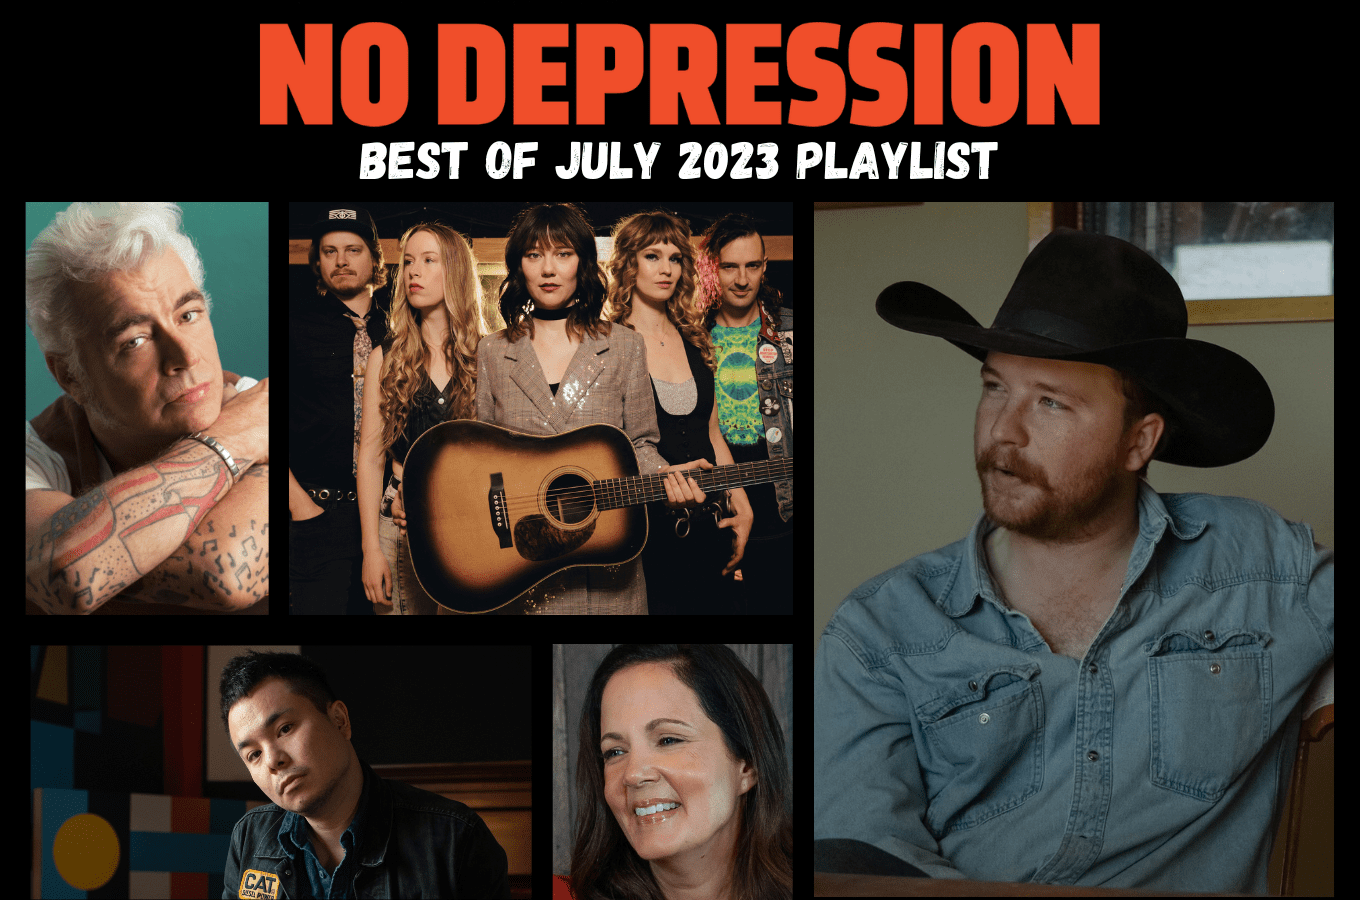 Our Best of July playlist features, clockwise from top left, Dale Watson, Molly Tuttle and Golden Highway, Colter Wall, Lori McKenna, and July Spotlight artist Gabe Lee.